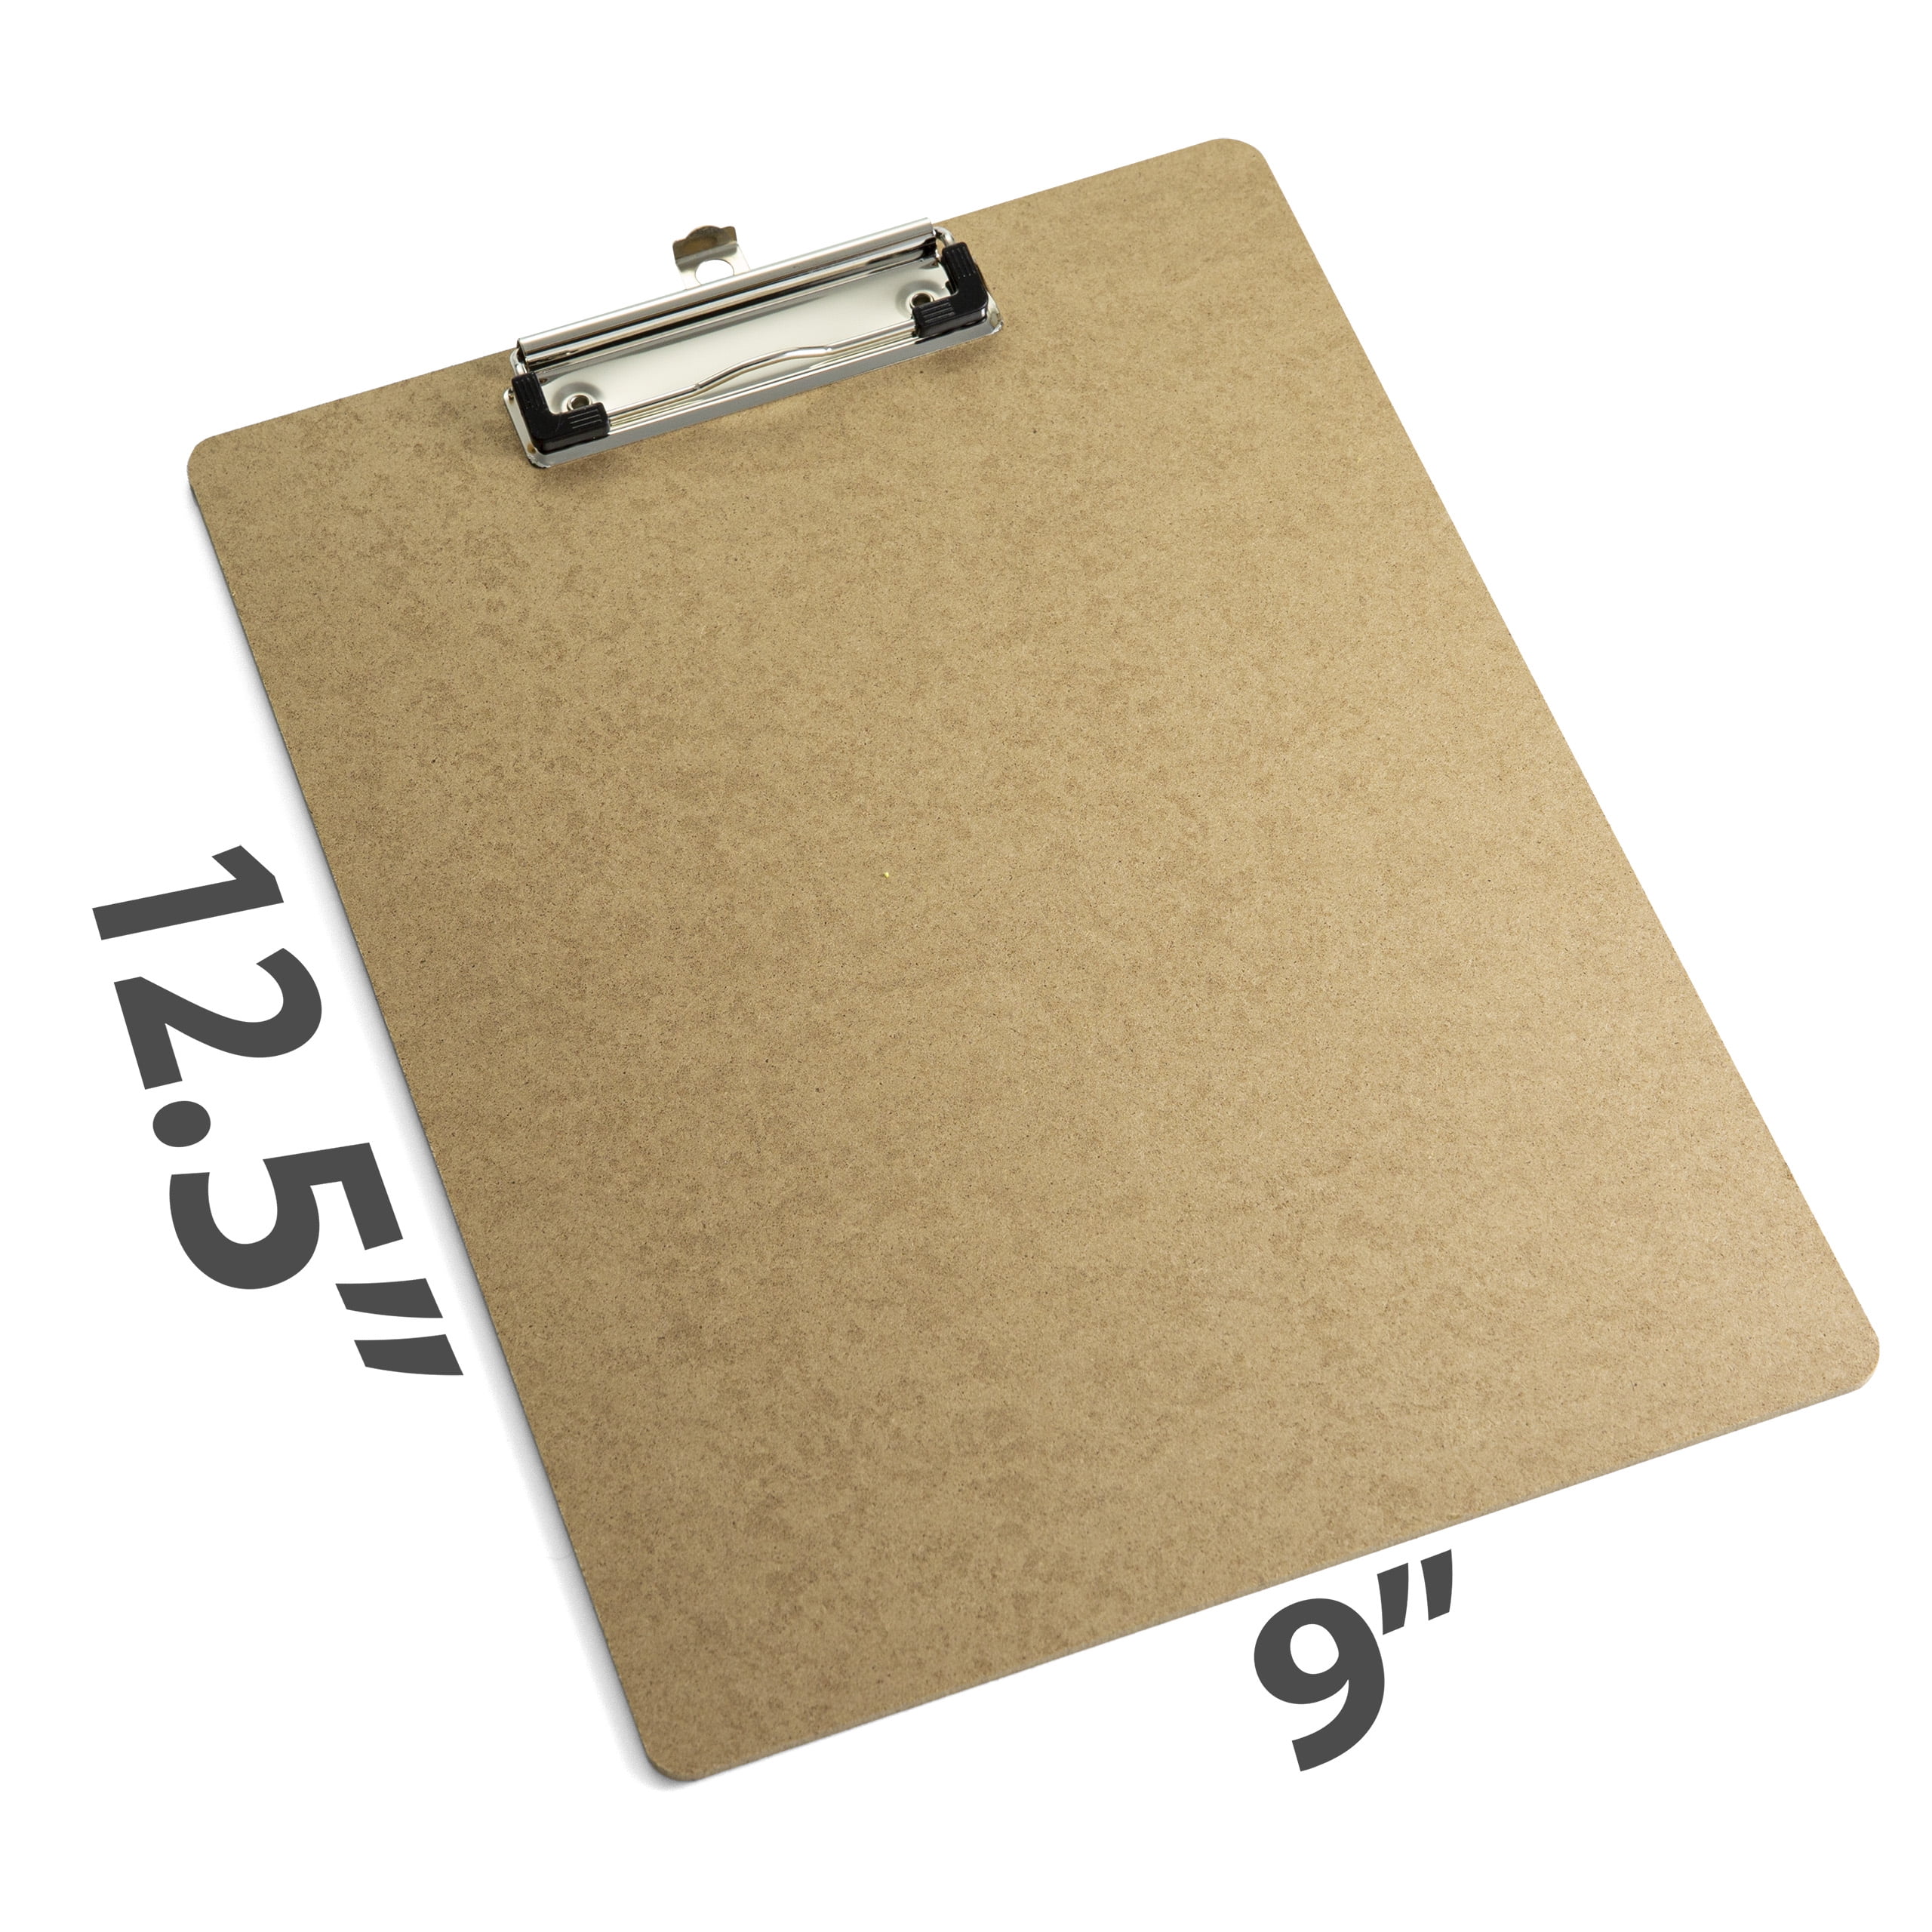 Crapyt Wooden Clipboard with Metal Clip Drawing Board A4 Size Hardboard  Office School for Memo Clipboard File Storage Wood Grain Durable Thicken